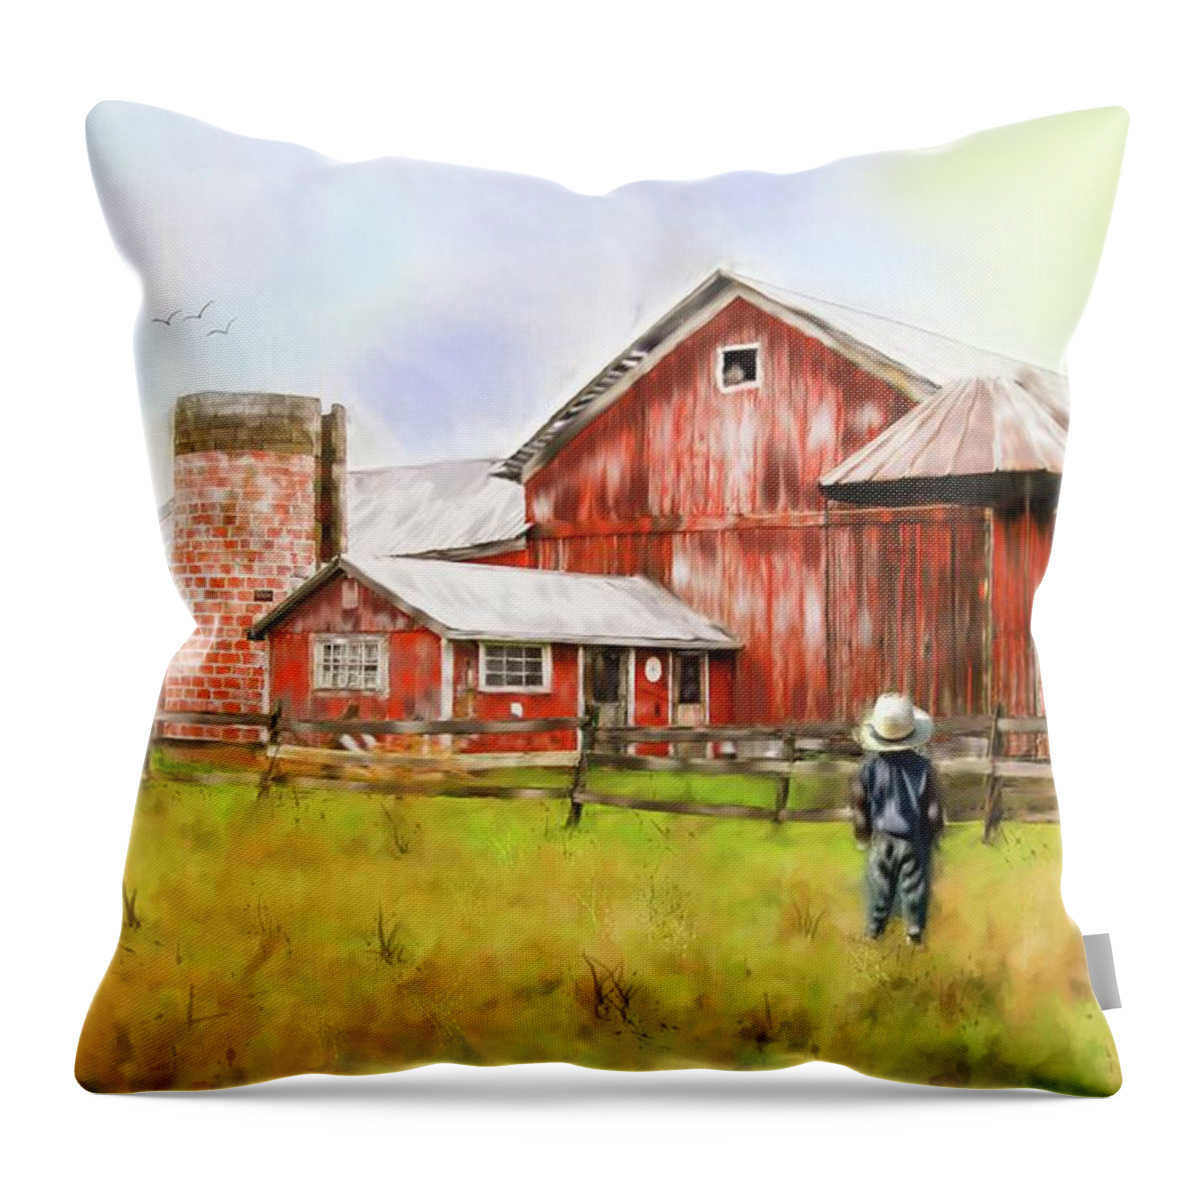 Little Boy Throw Pillow featuring the photograph Little Boy on the Farm by Mary Timman